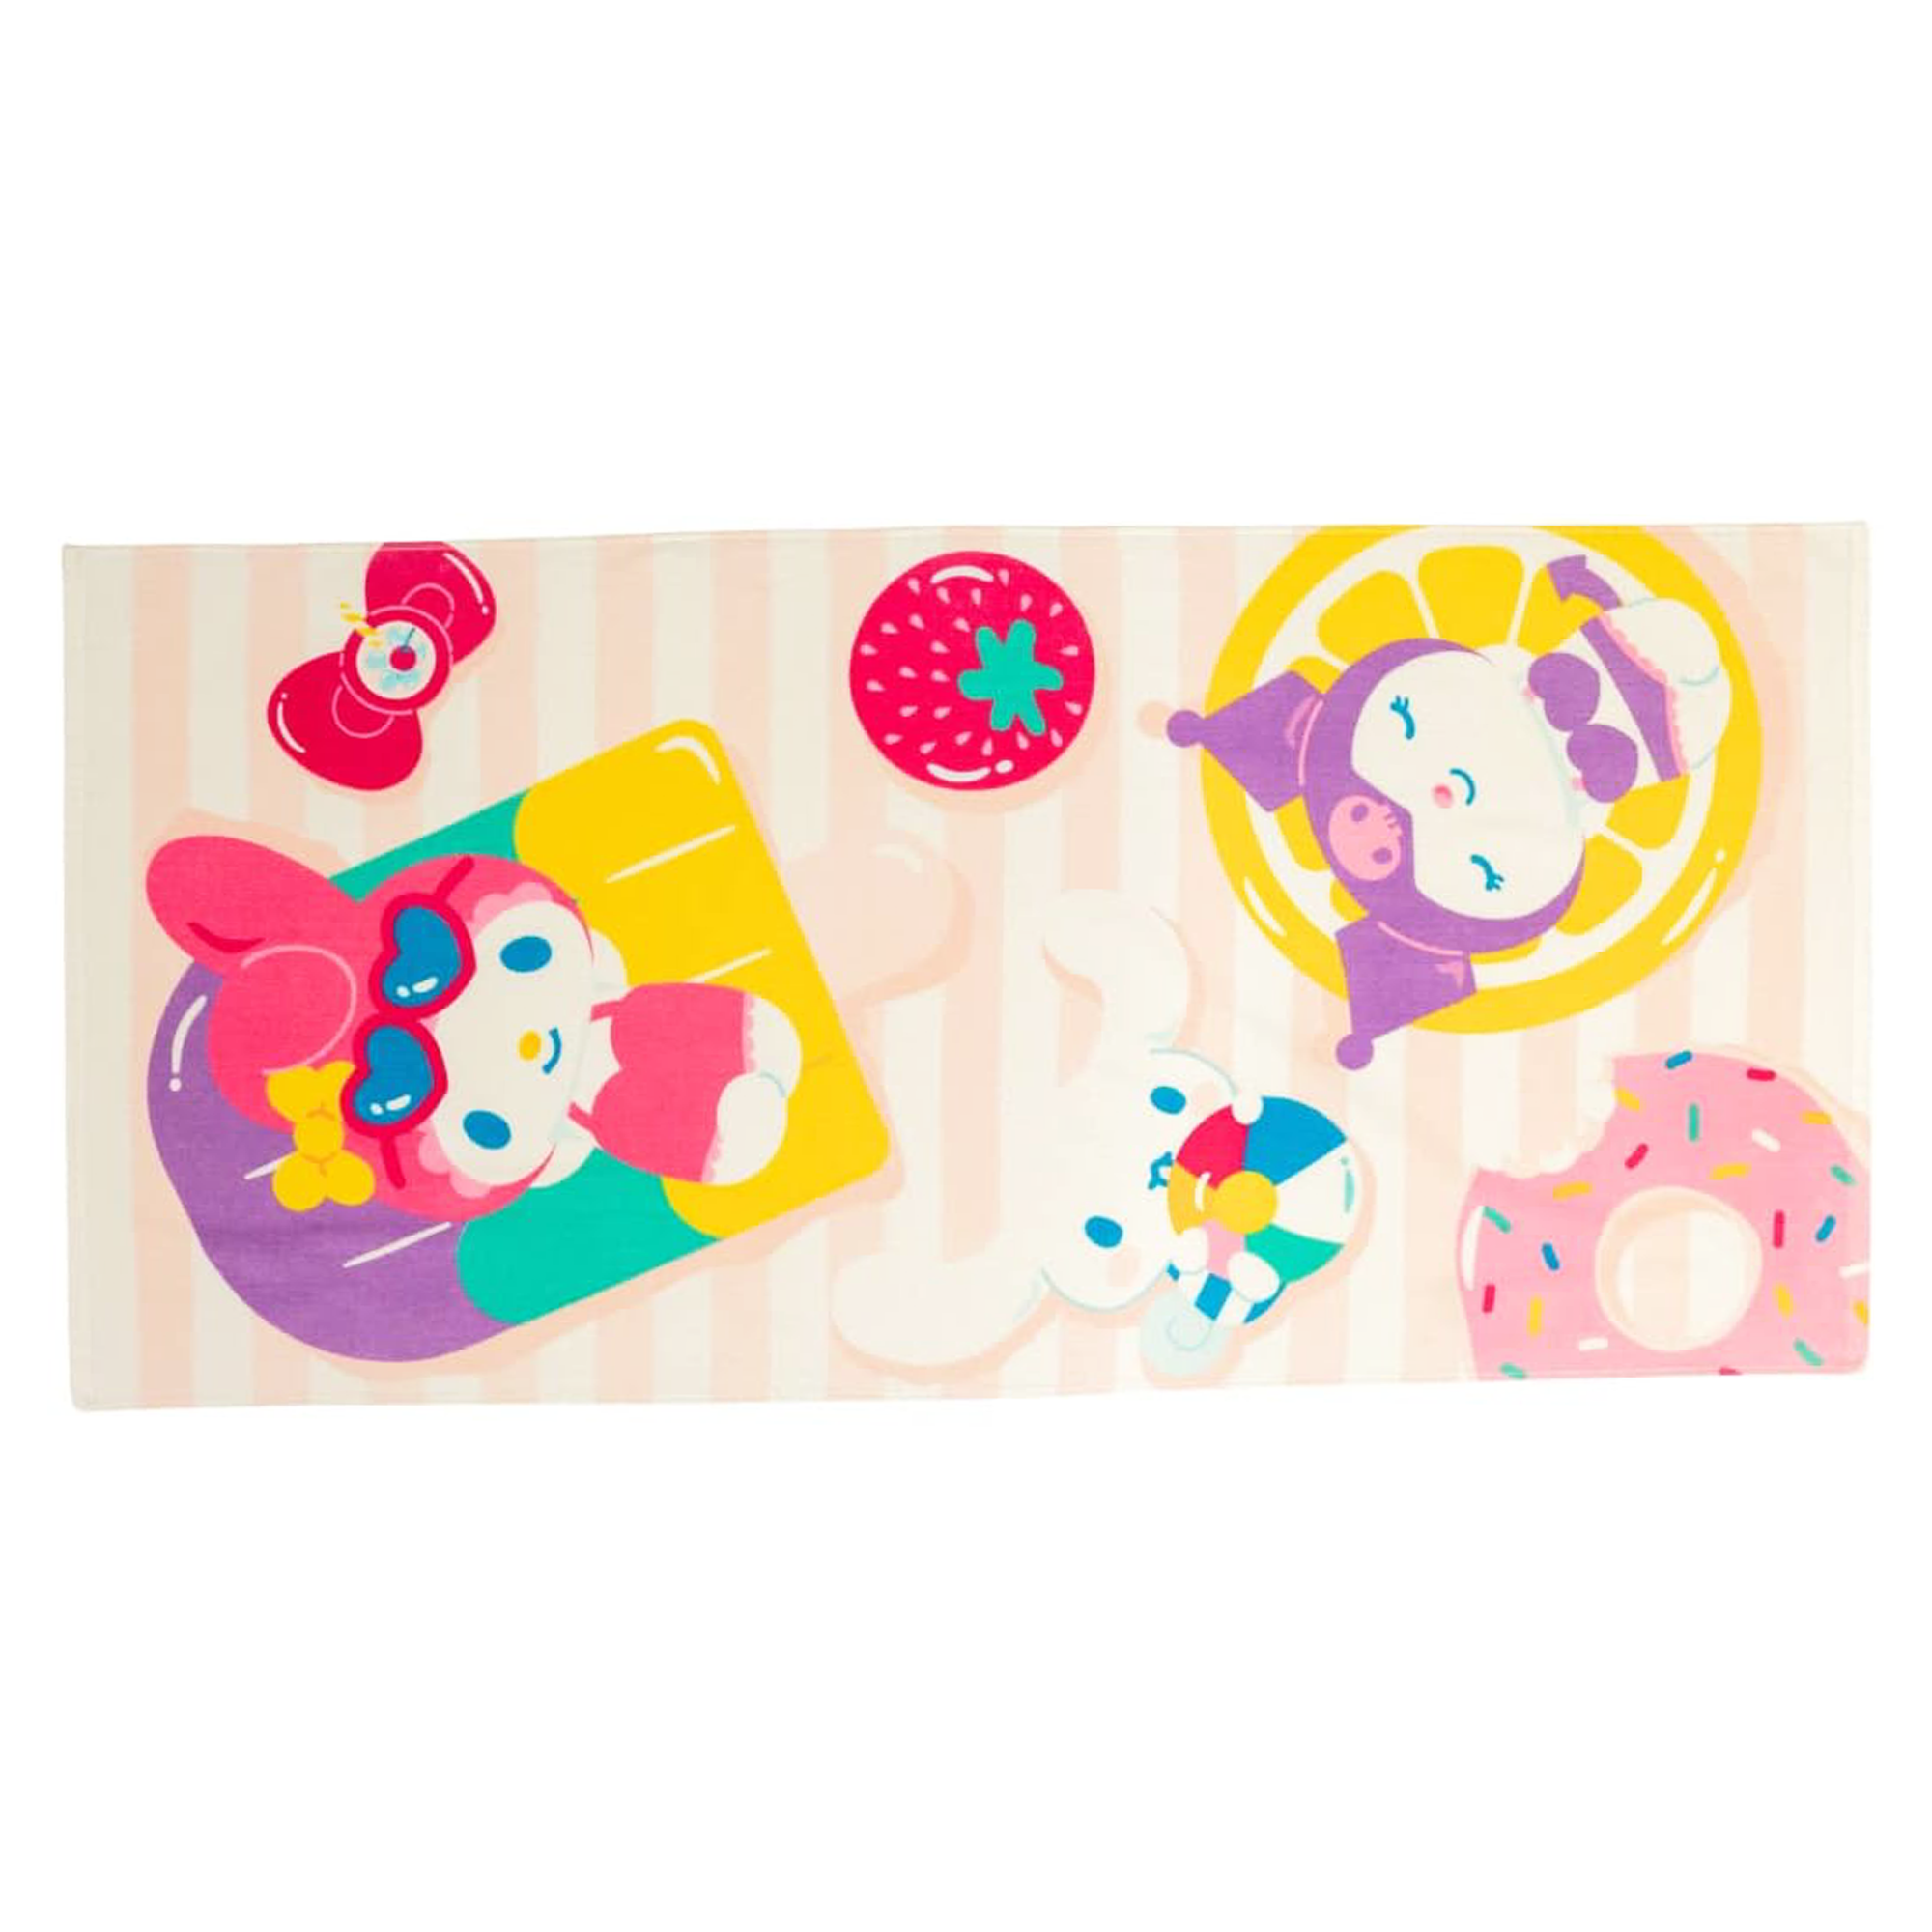 Sanrio Characters Ice Cream Float Beach Towel Travel Franco Manufacturing Co Inc   